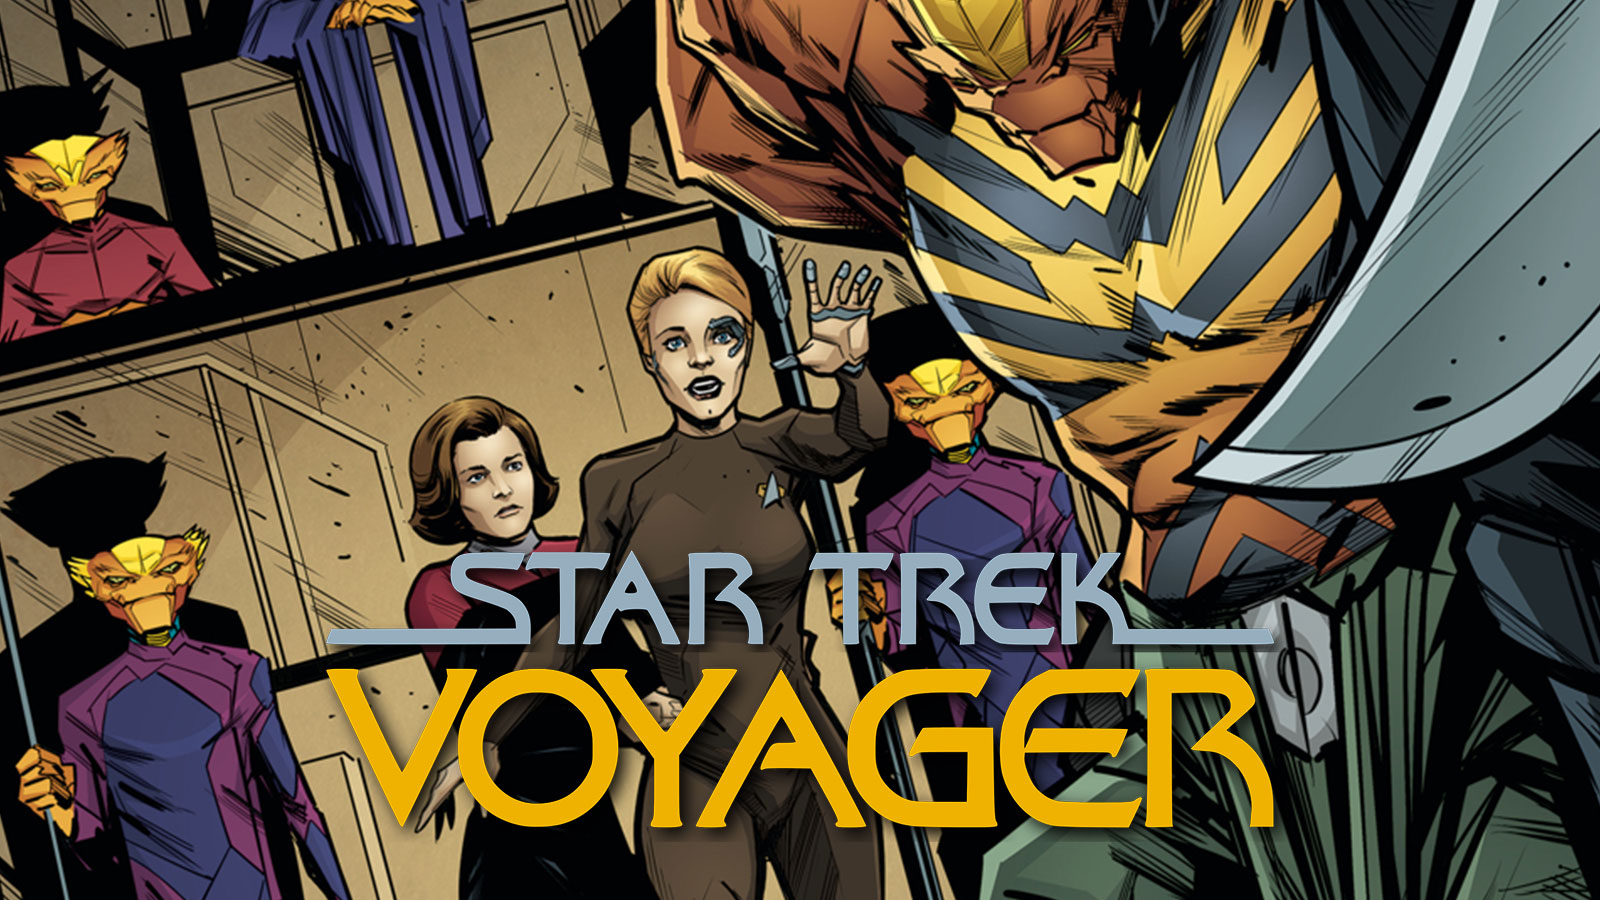 Seven’s Reckoning Issue 4 Review: The Star Trek: Voyager Miniseries Culminates In Epic Fashion